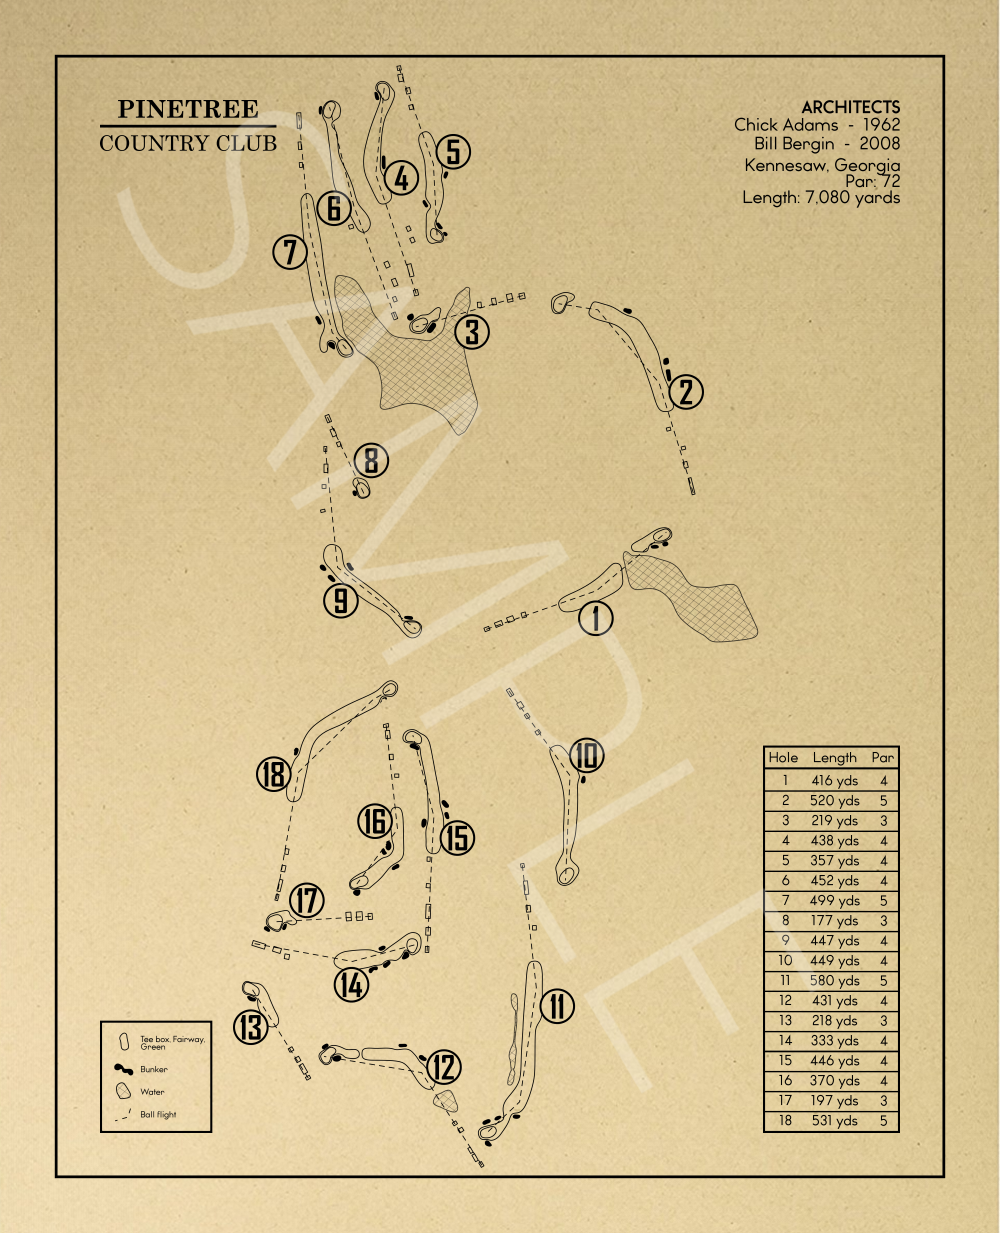 Pinetree Country Club Outline (Print)